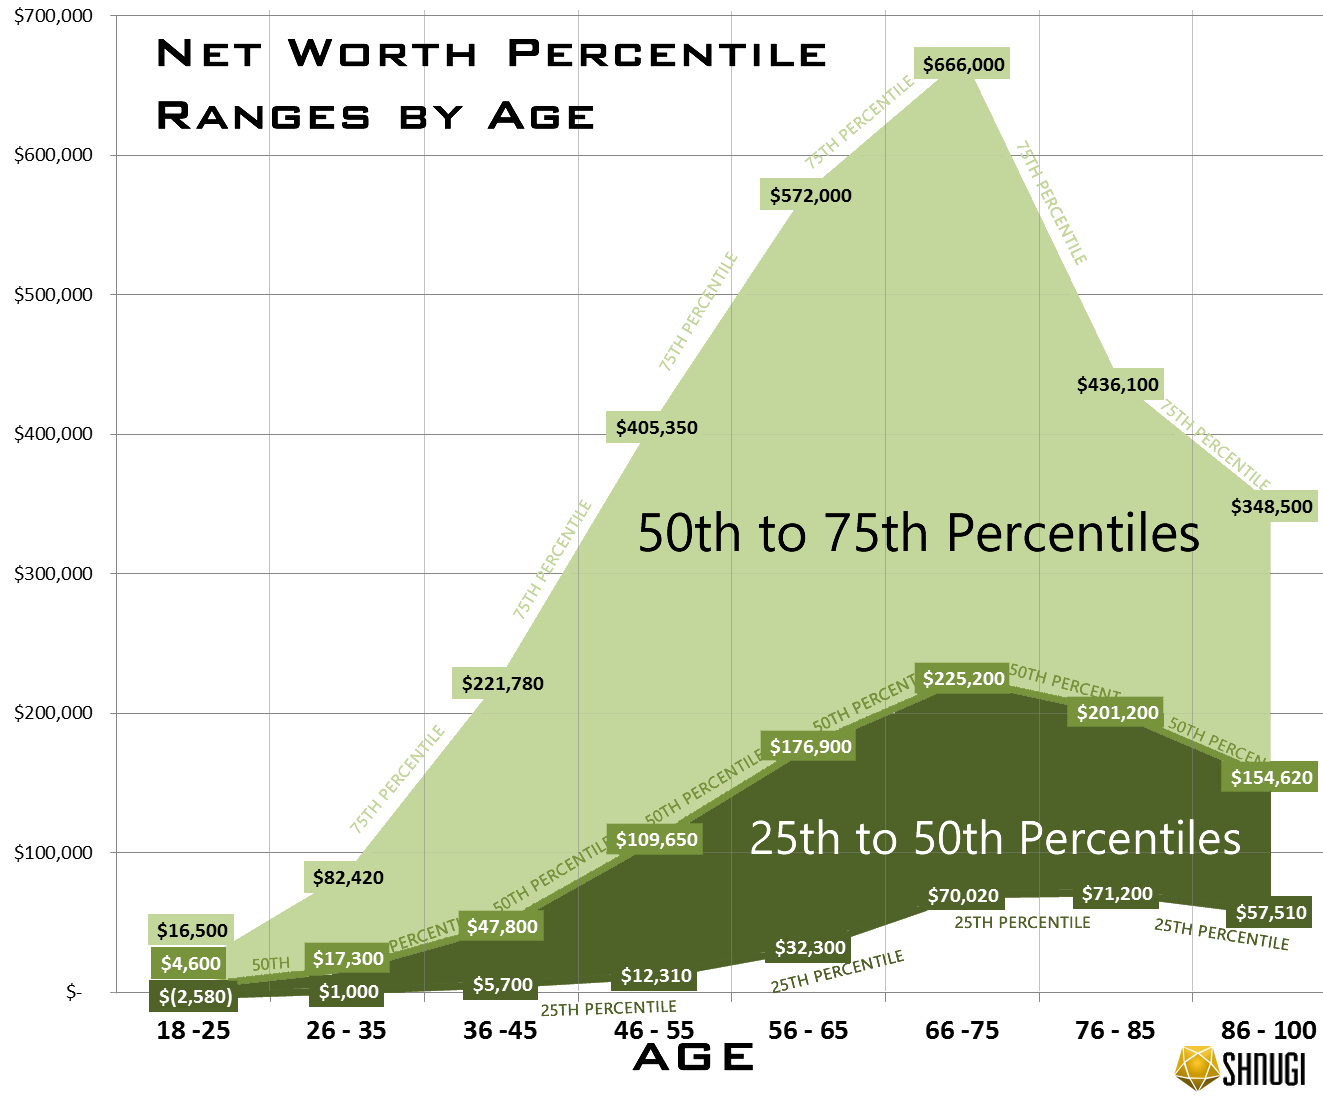 Explore Net Worth Rankings by Age (25th to 75th Percentiles) Personal